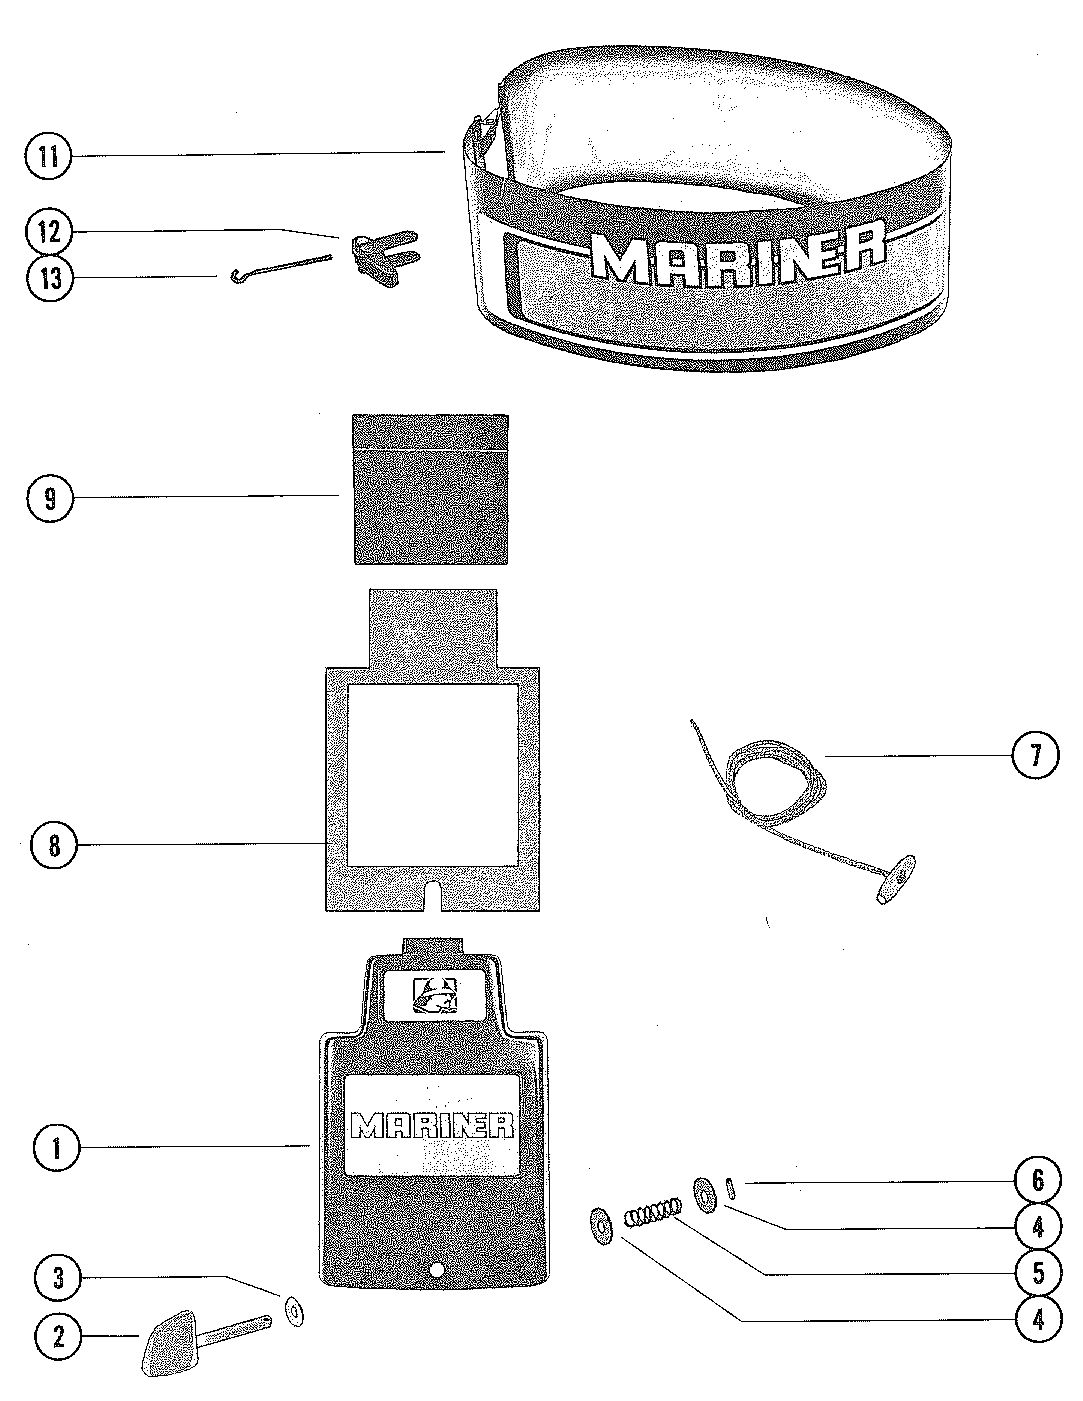 MARINER 80 HORSEPOWER COWLING AND FRONT COVER